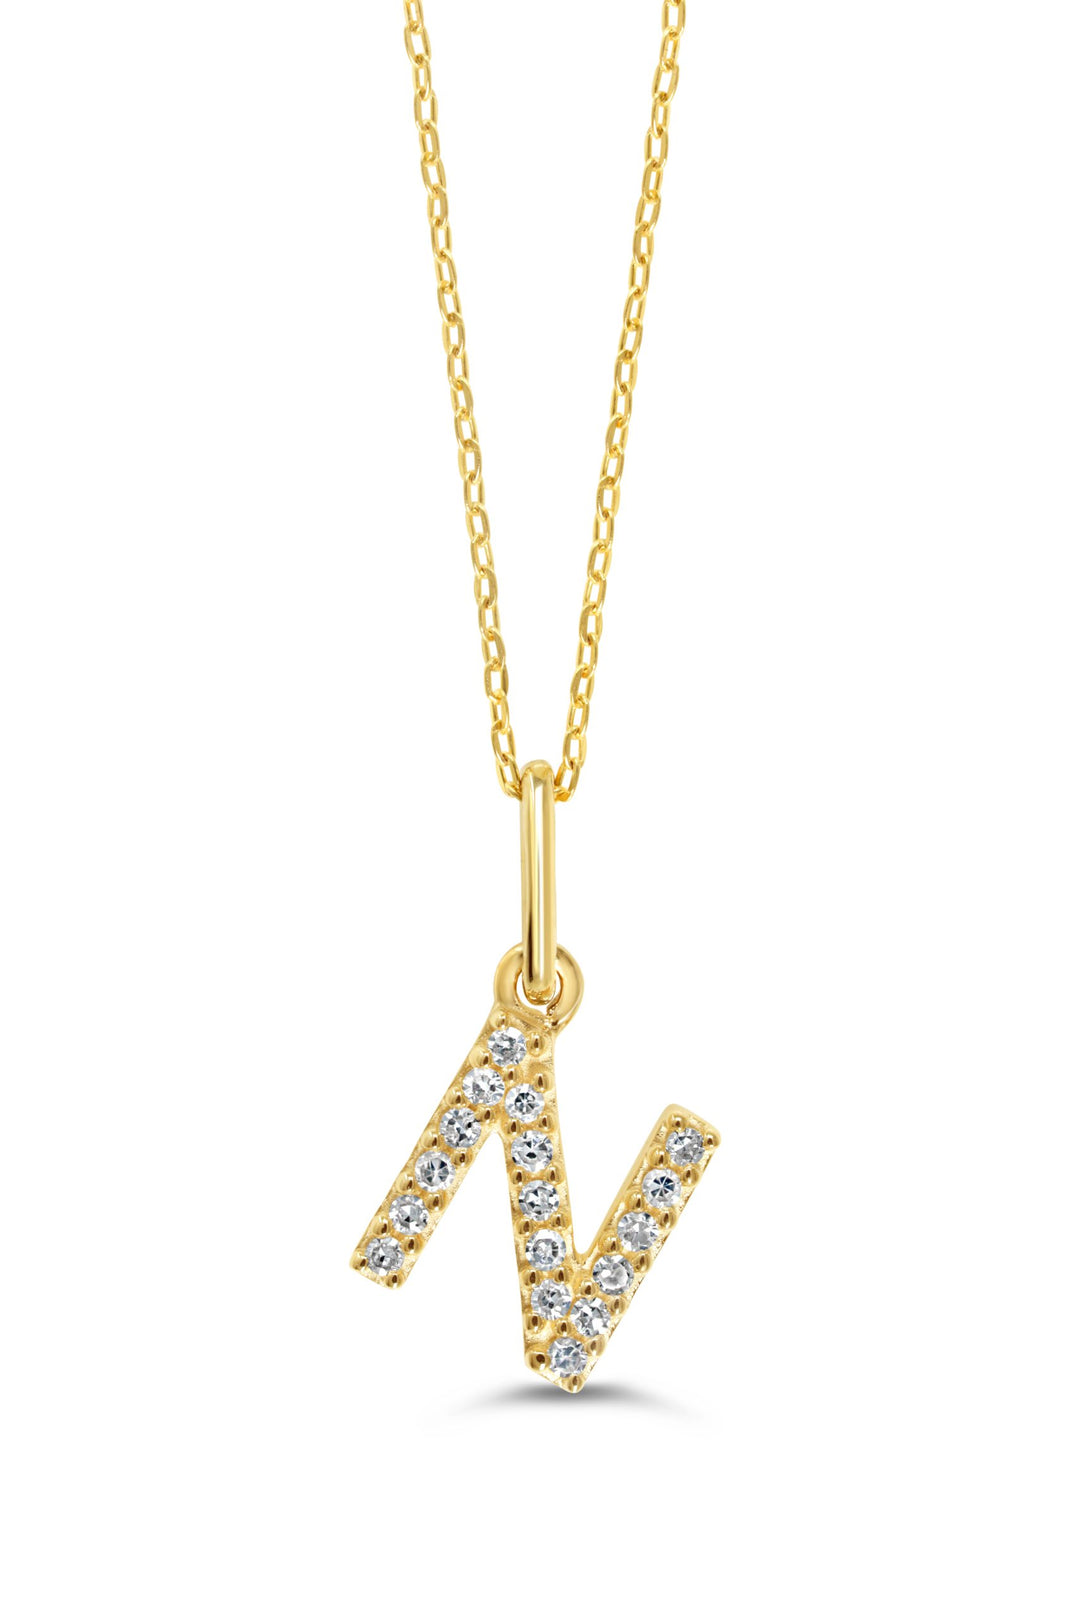 10K Yellow Gold Small Diamond Set Initial "N" Pendant Complete With Fine Open Cable Link 18" Chain